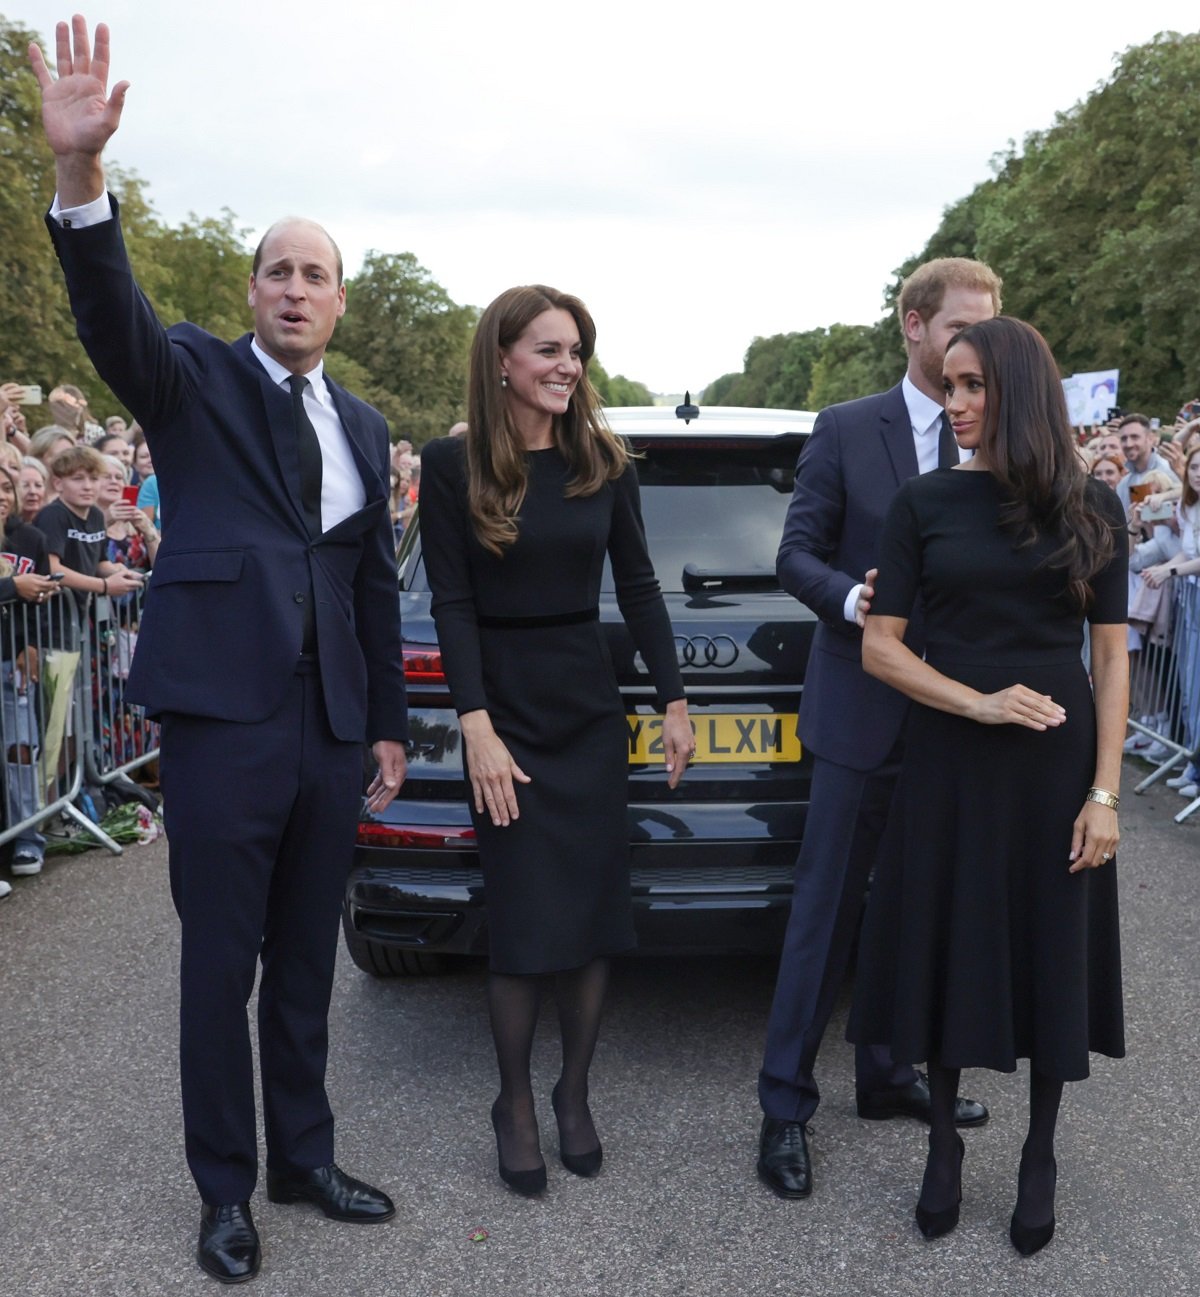 Prince William waving to crowds on the Long Walk at Windsor Castle after walkabout with Kate Middleton, Prince Harry, and Meghan Markle